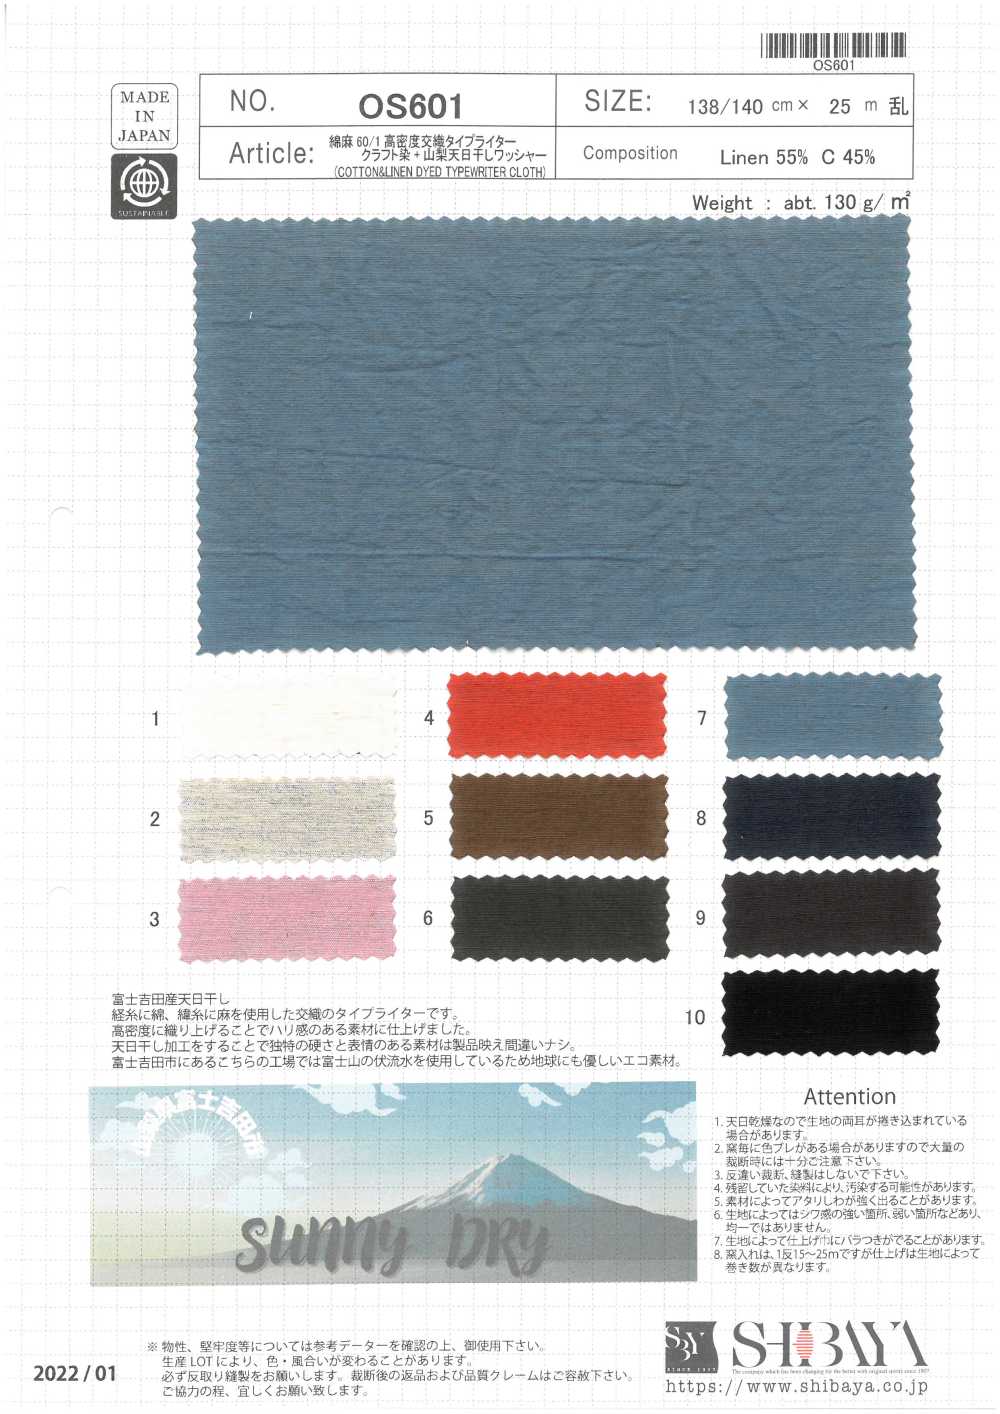 OS601 Cotton Linen 60/1 High Density Mixed Weave Typewritter Cloth Craft Dyed Sun Drying Washer Processing[Textile / Fabric] SHIBAYA